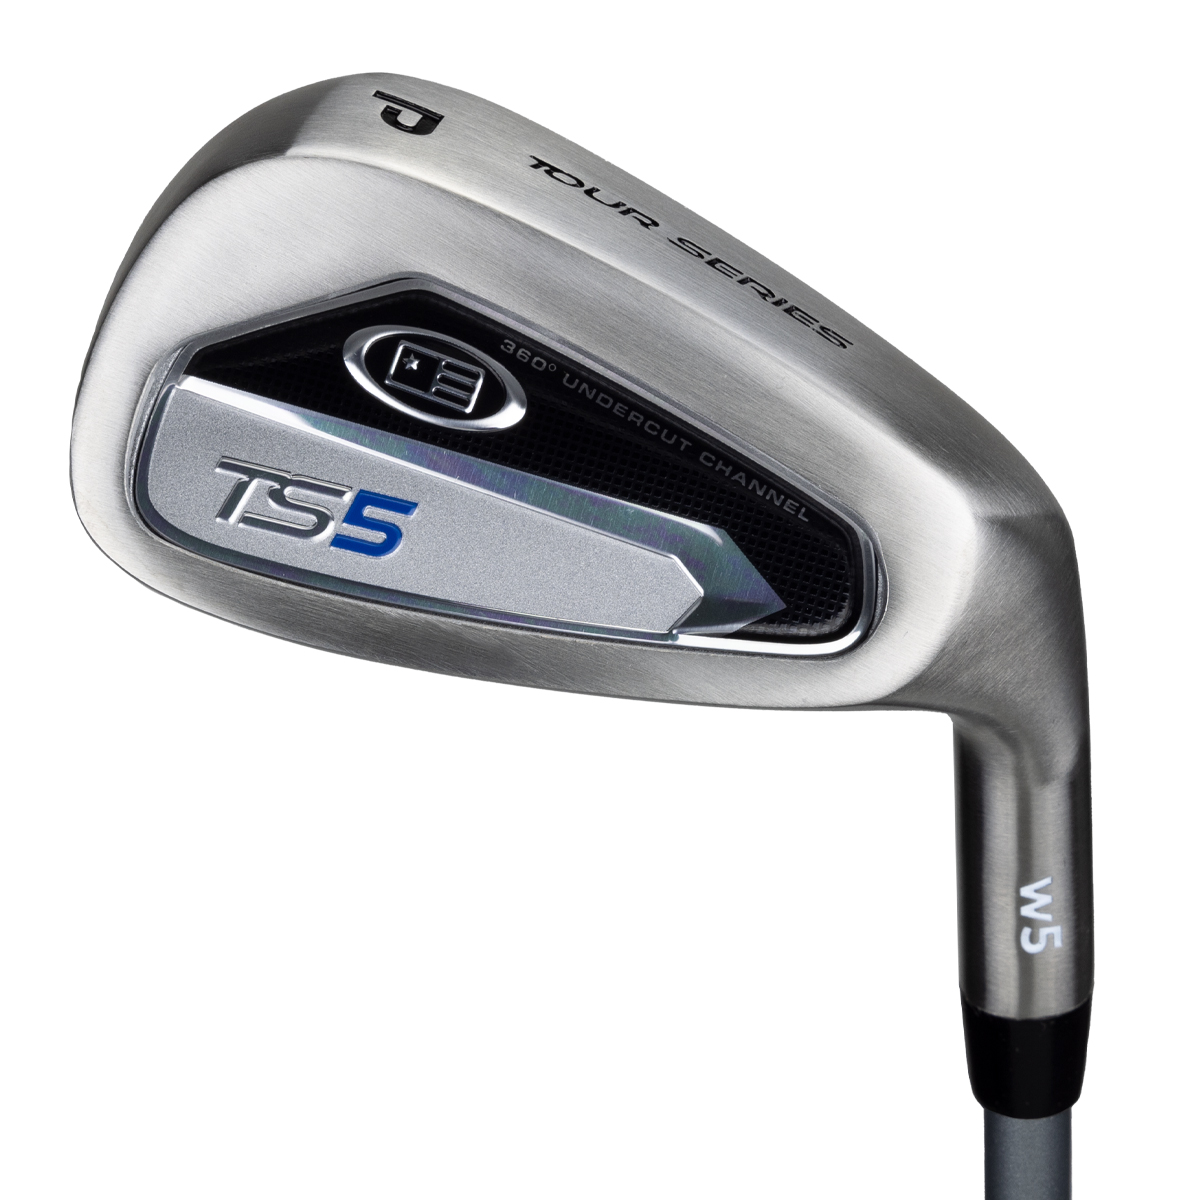 TS5-66  Pitching Wedge, w5 Graphite Shaft